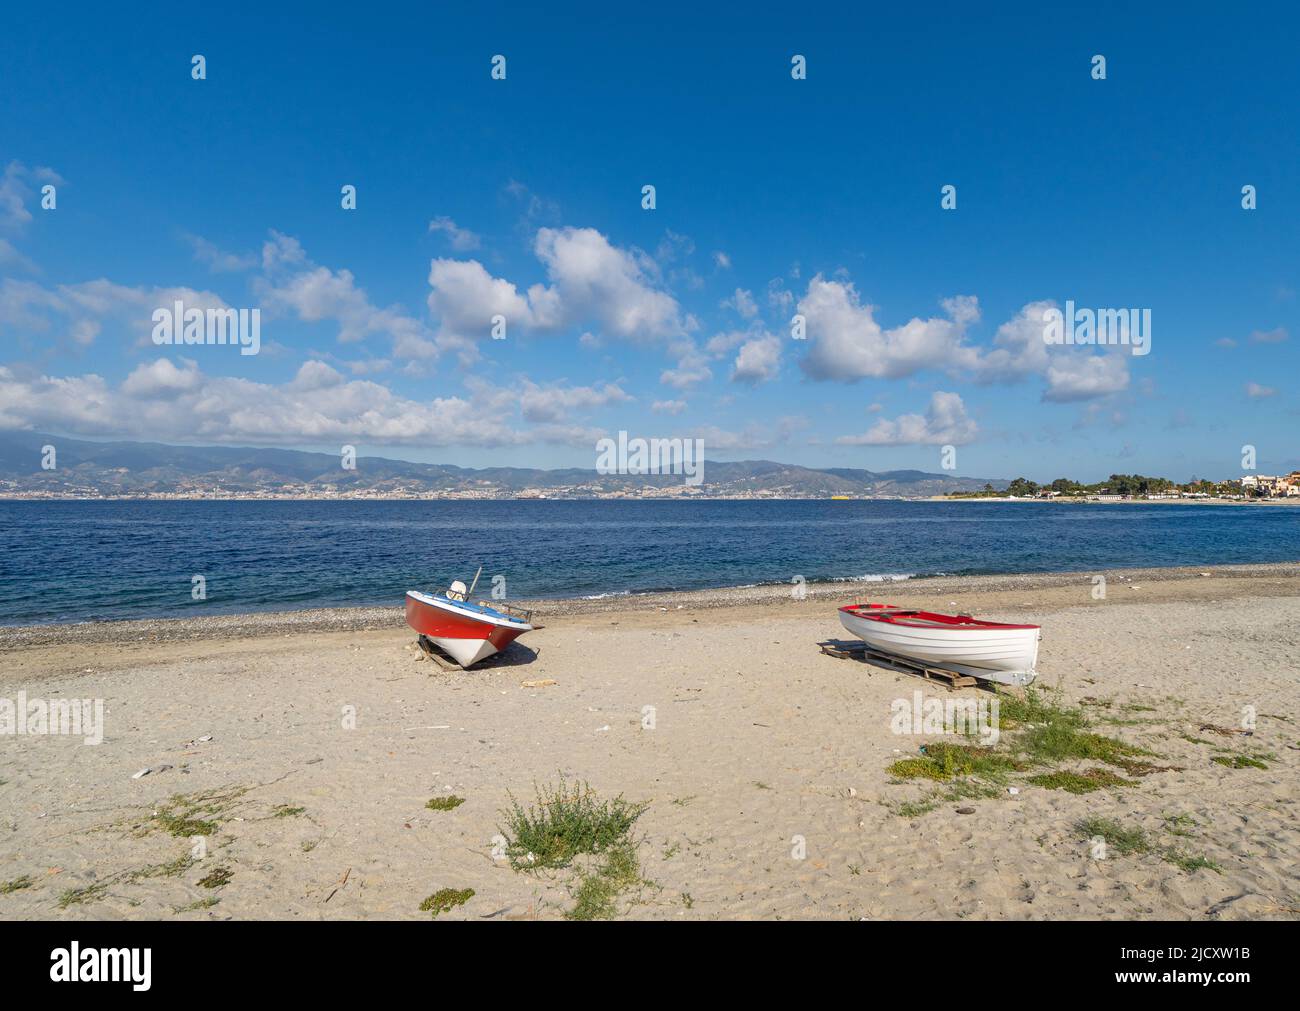 Two small wooden boats on sandy beach in southern Italy Stock Photo